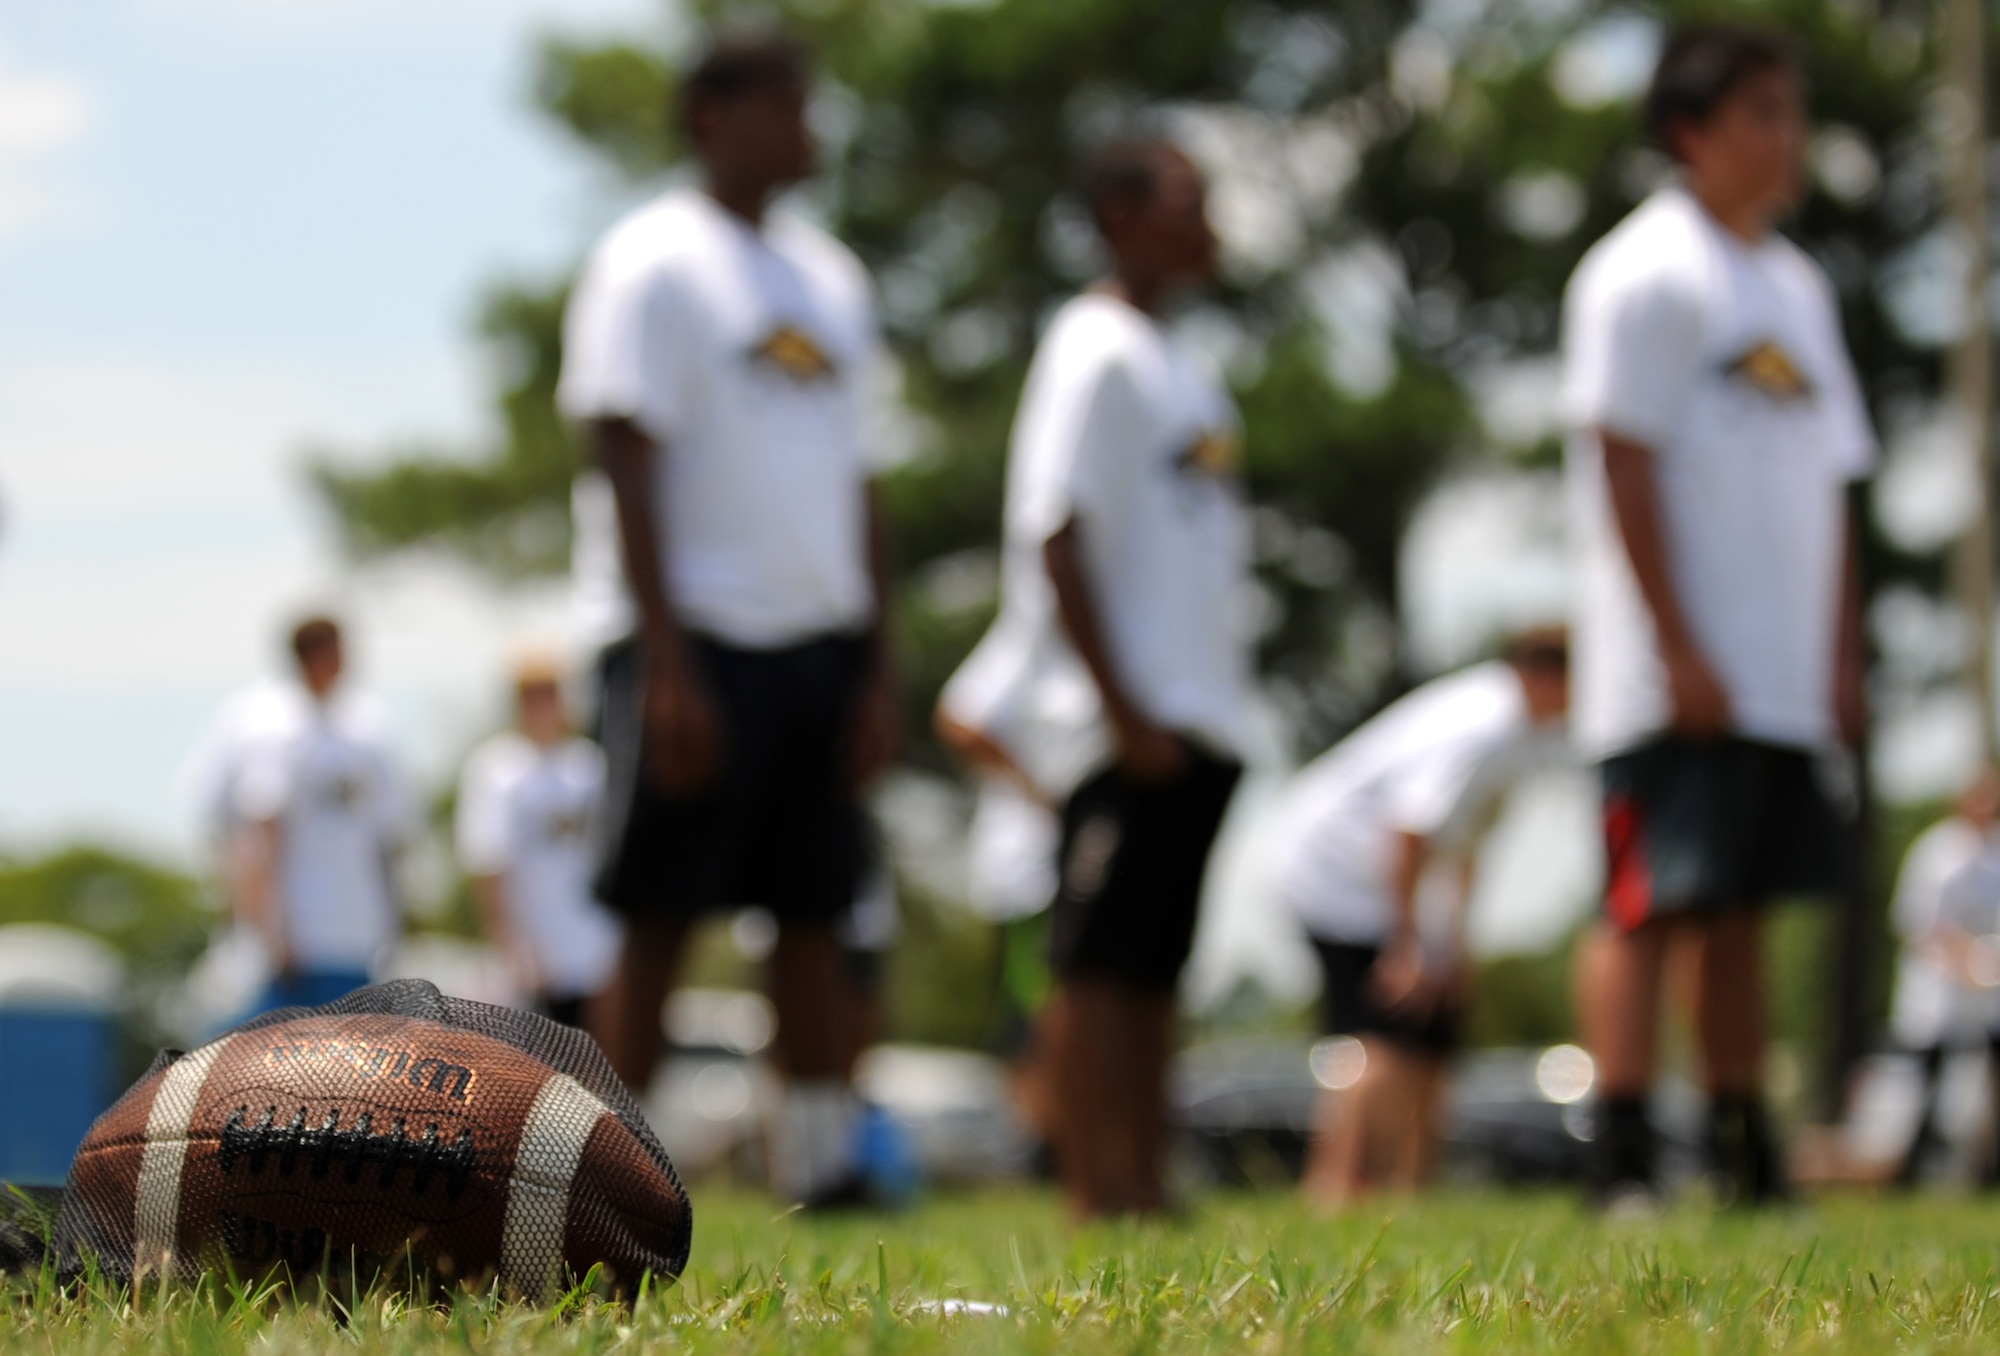 Young athletes line up for a passing drill during a National Football League ProCamp, July 16, 2015, at Seymour Johnson Air Force Base, North Carolina. Cortez Allen, Pittsburgh Steelers defensive back, was the featured NFL player during the two-day camp. (U.S. Air Force photo/Senior Airman Ashley J. Thum)